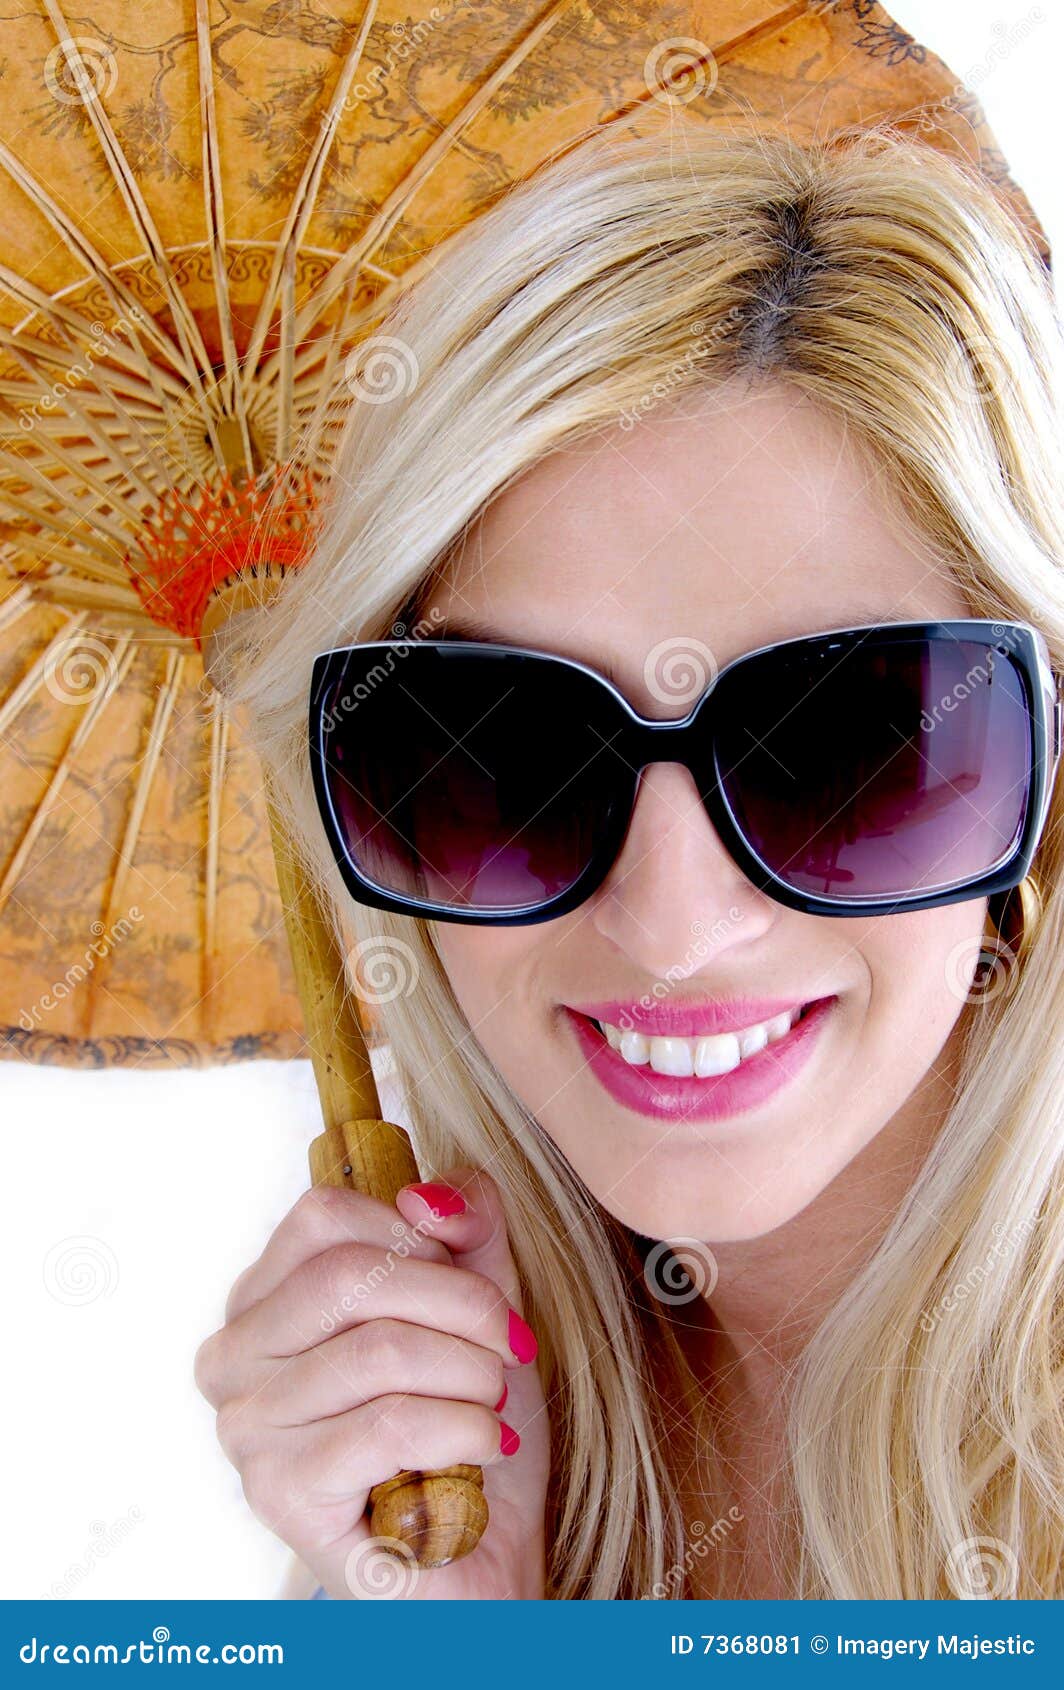 Front View of Smiling Woman in Sunglasses Stock Image - Image of ...